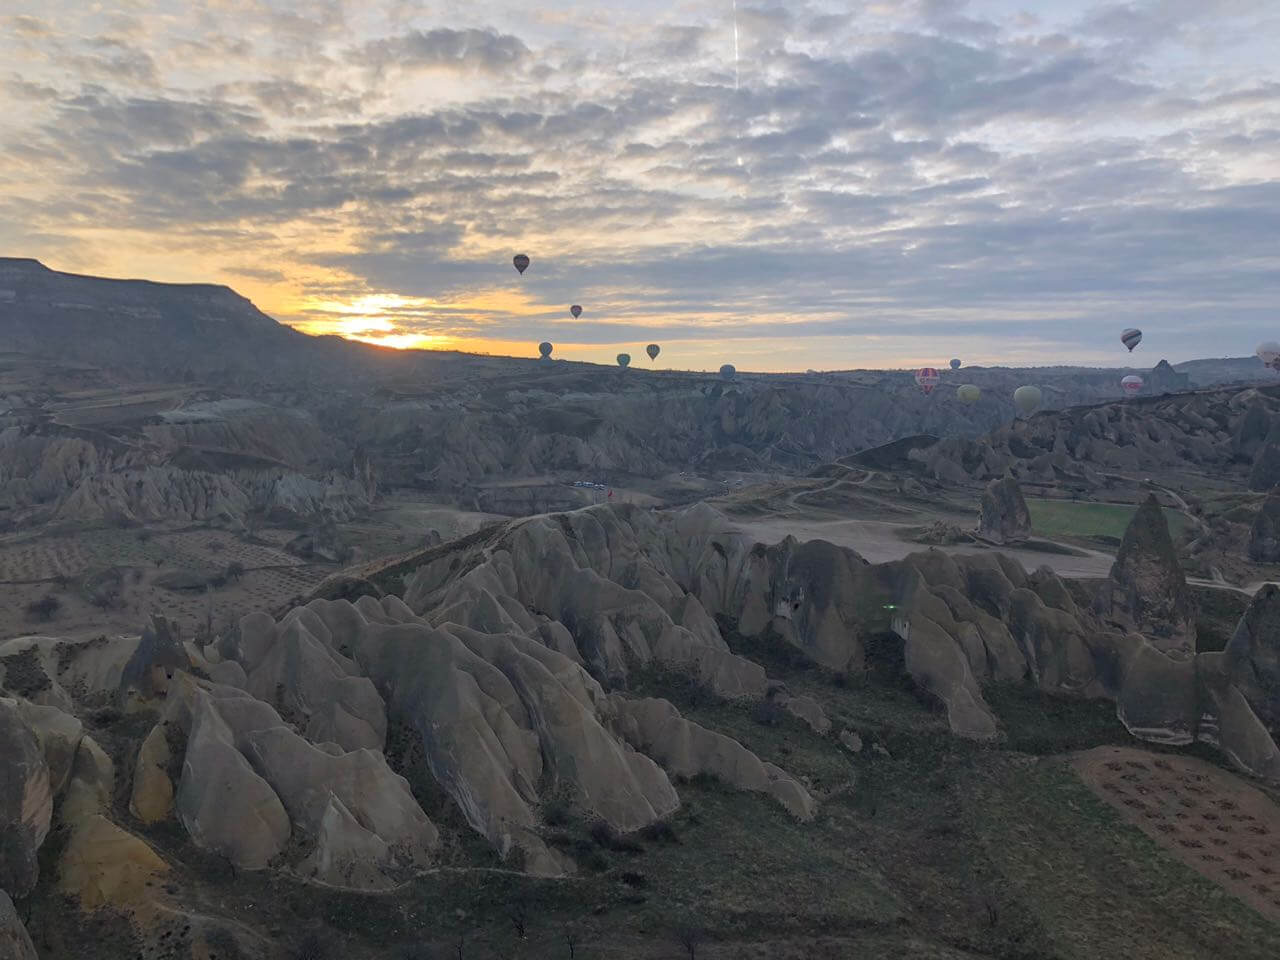 Royal Balloon Cappadocia is the best choice for taking a hot air balloon ride because it takes off from an exclusive launch site providing you with stunning views of the Cappadocian landscape